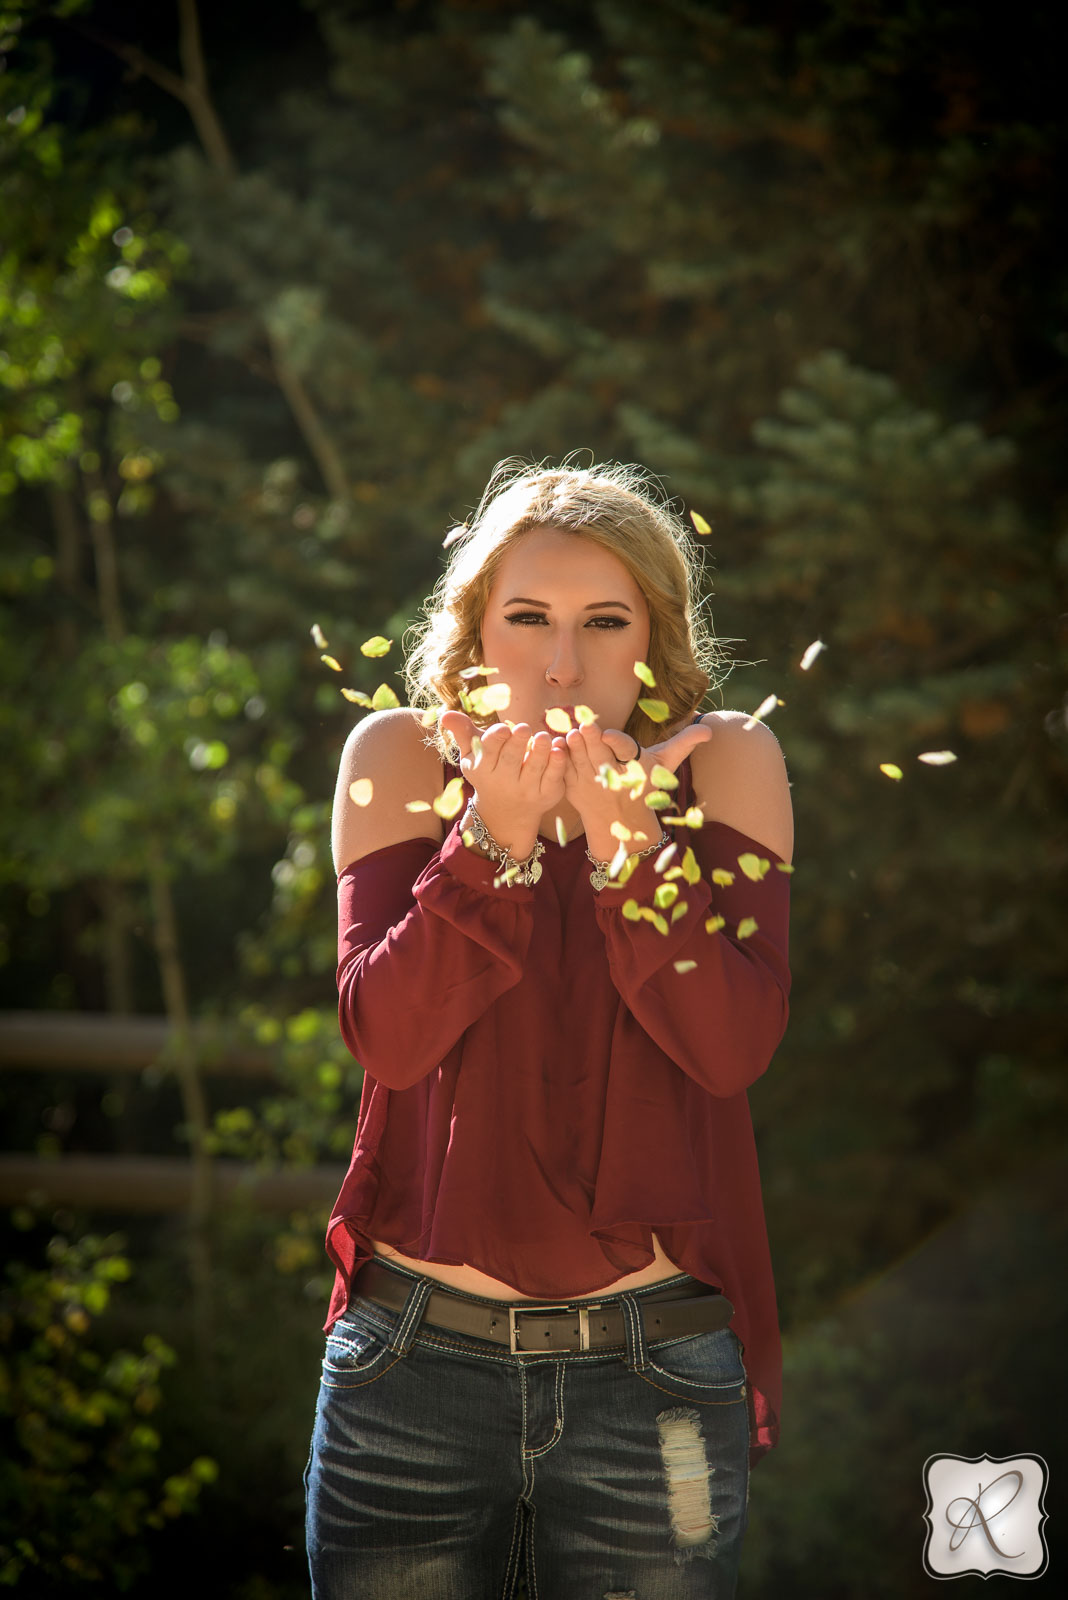 Fall Senior Pictures